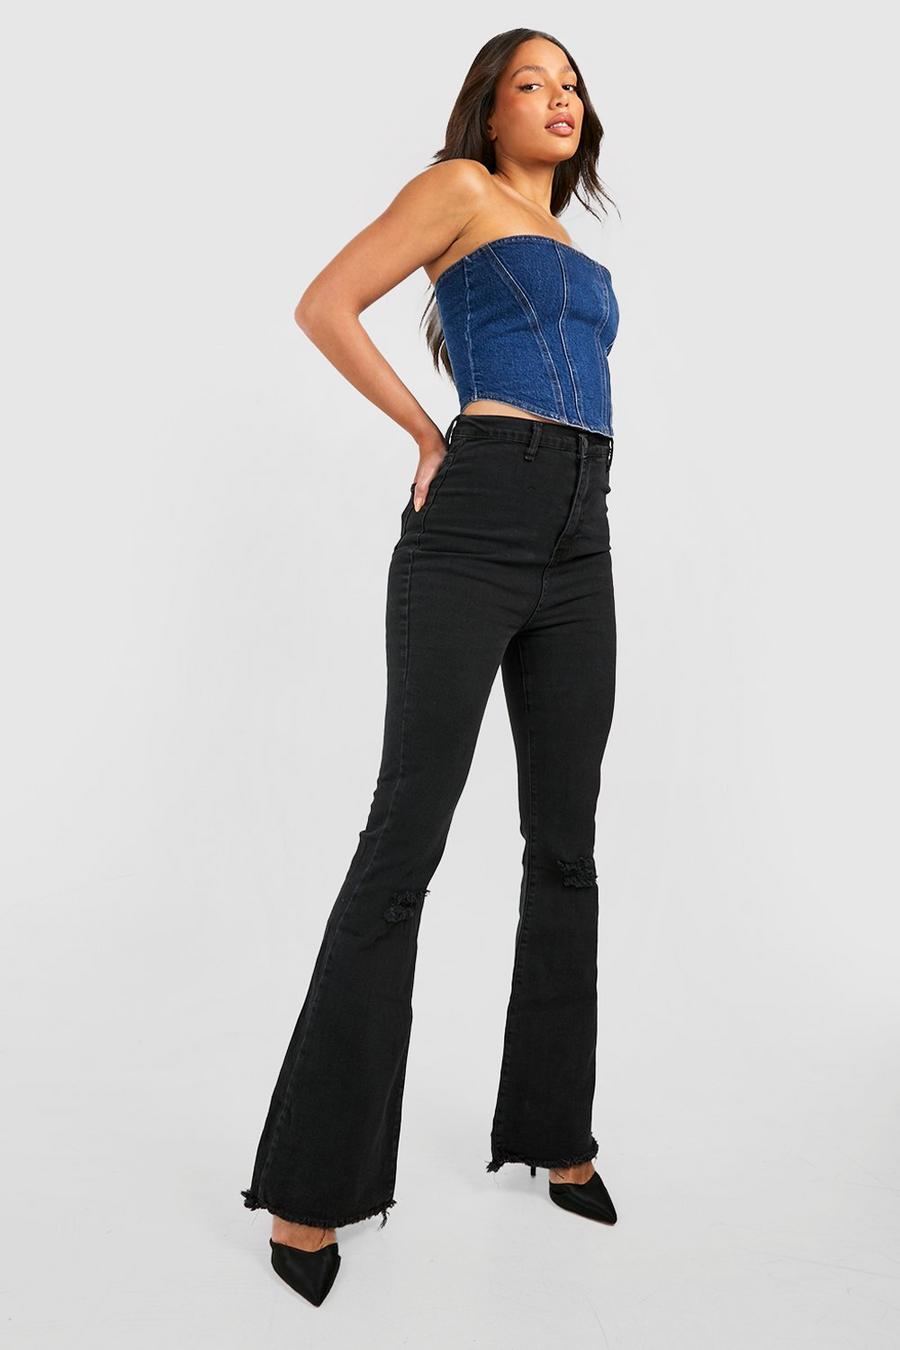 Women’s Bell Bottom Jeans Ripped Hole High Waisted Classic Flared Pants 